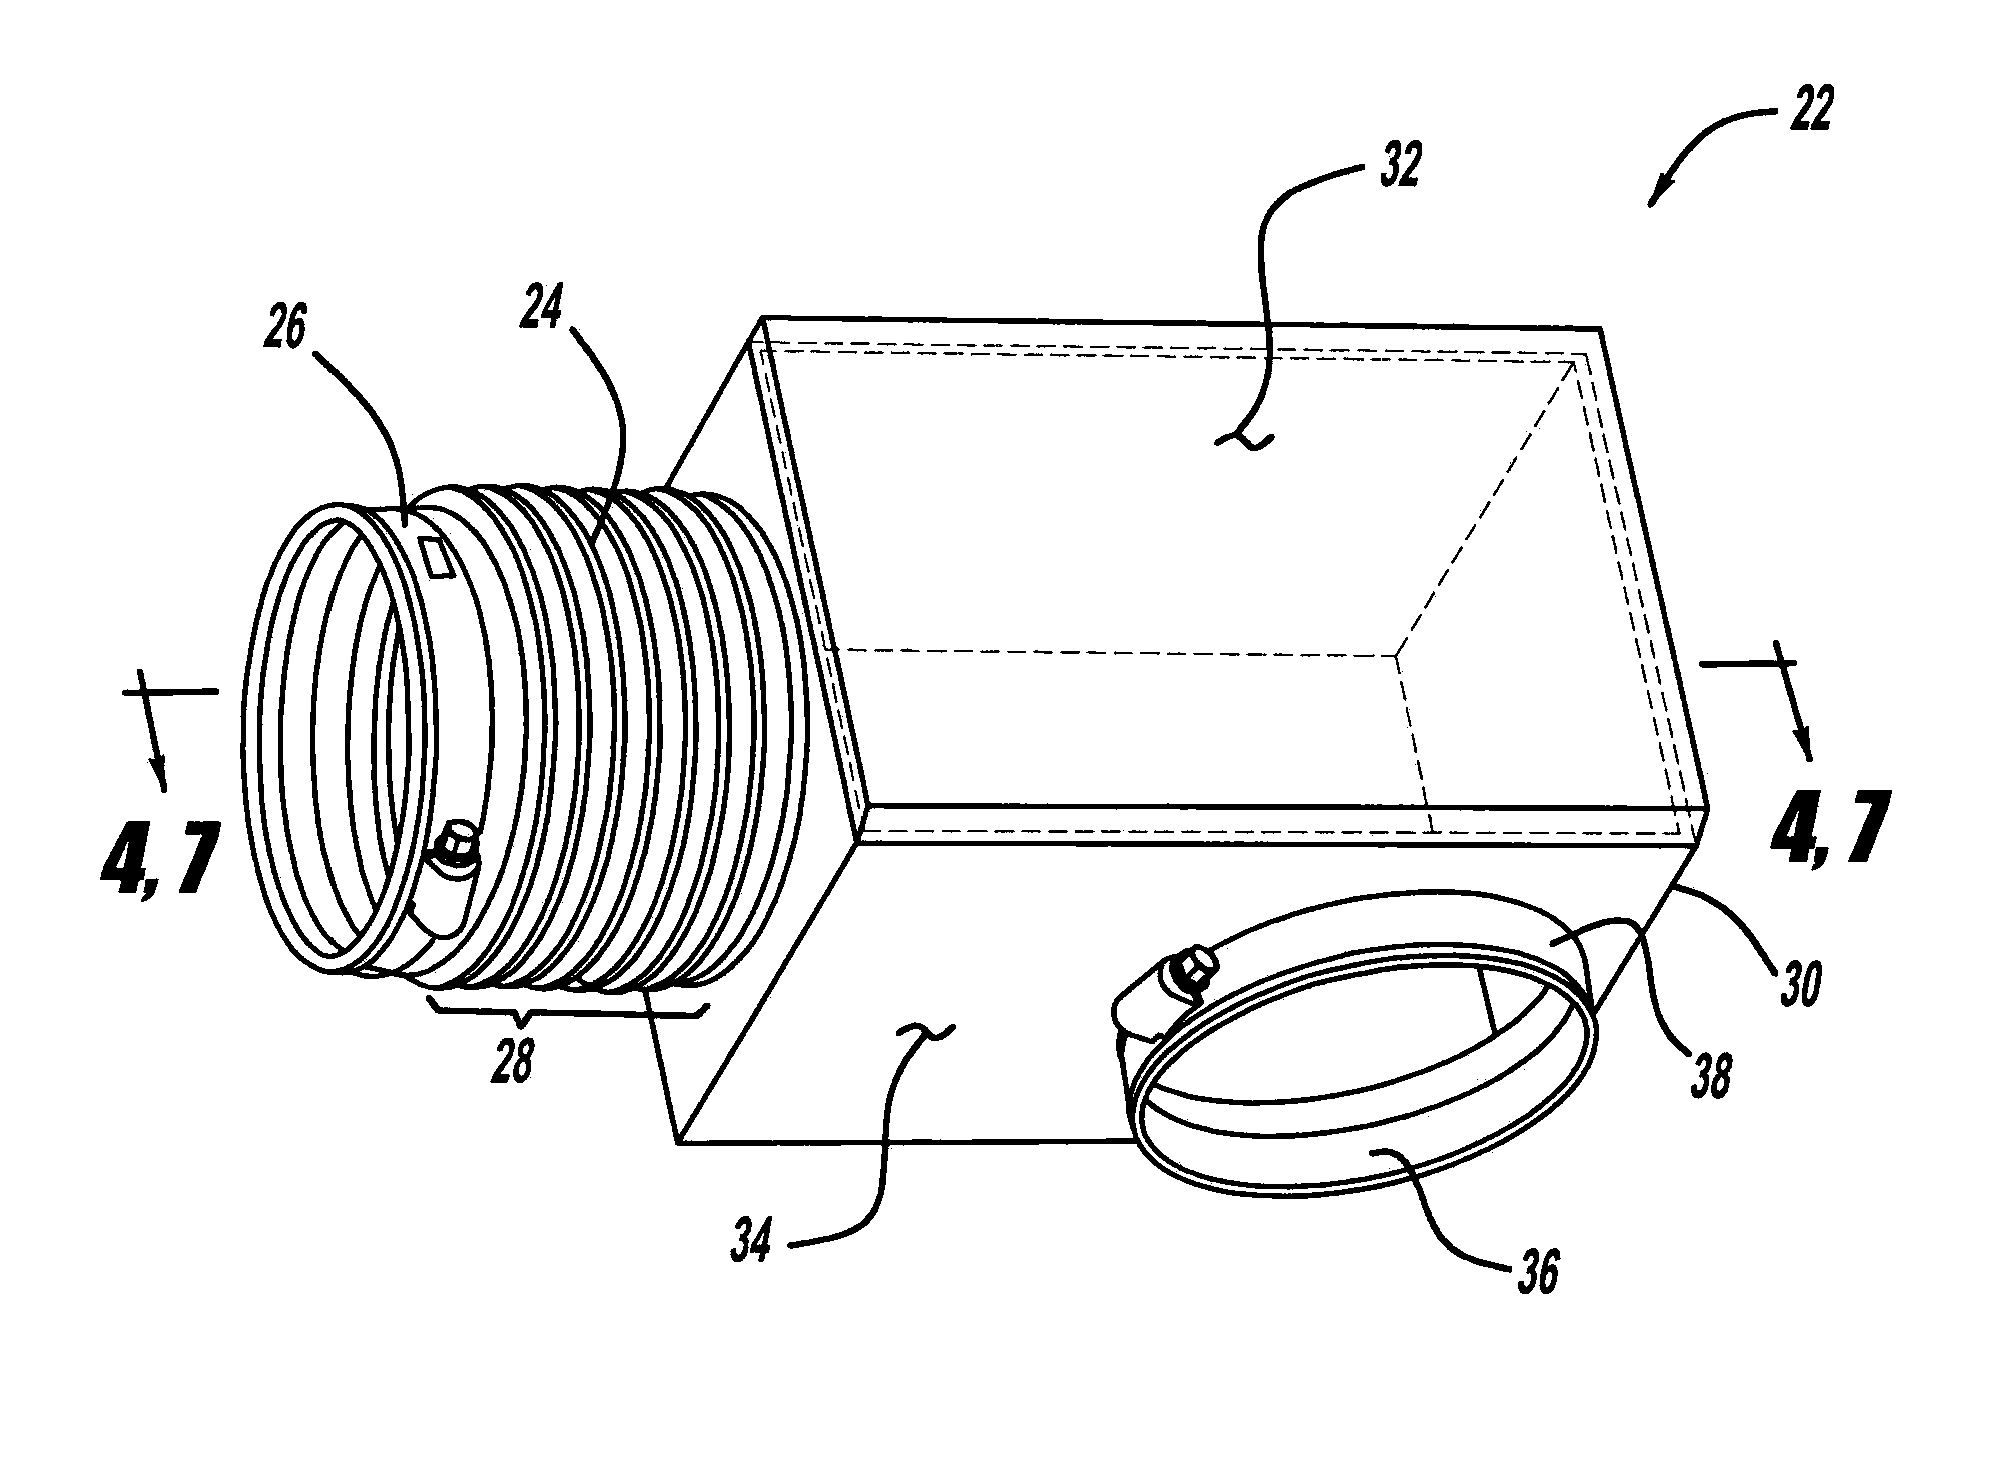 Flexible seal and molded rigid chamber